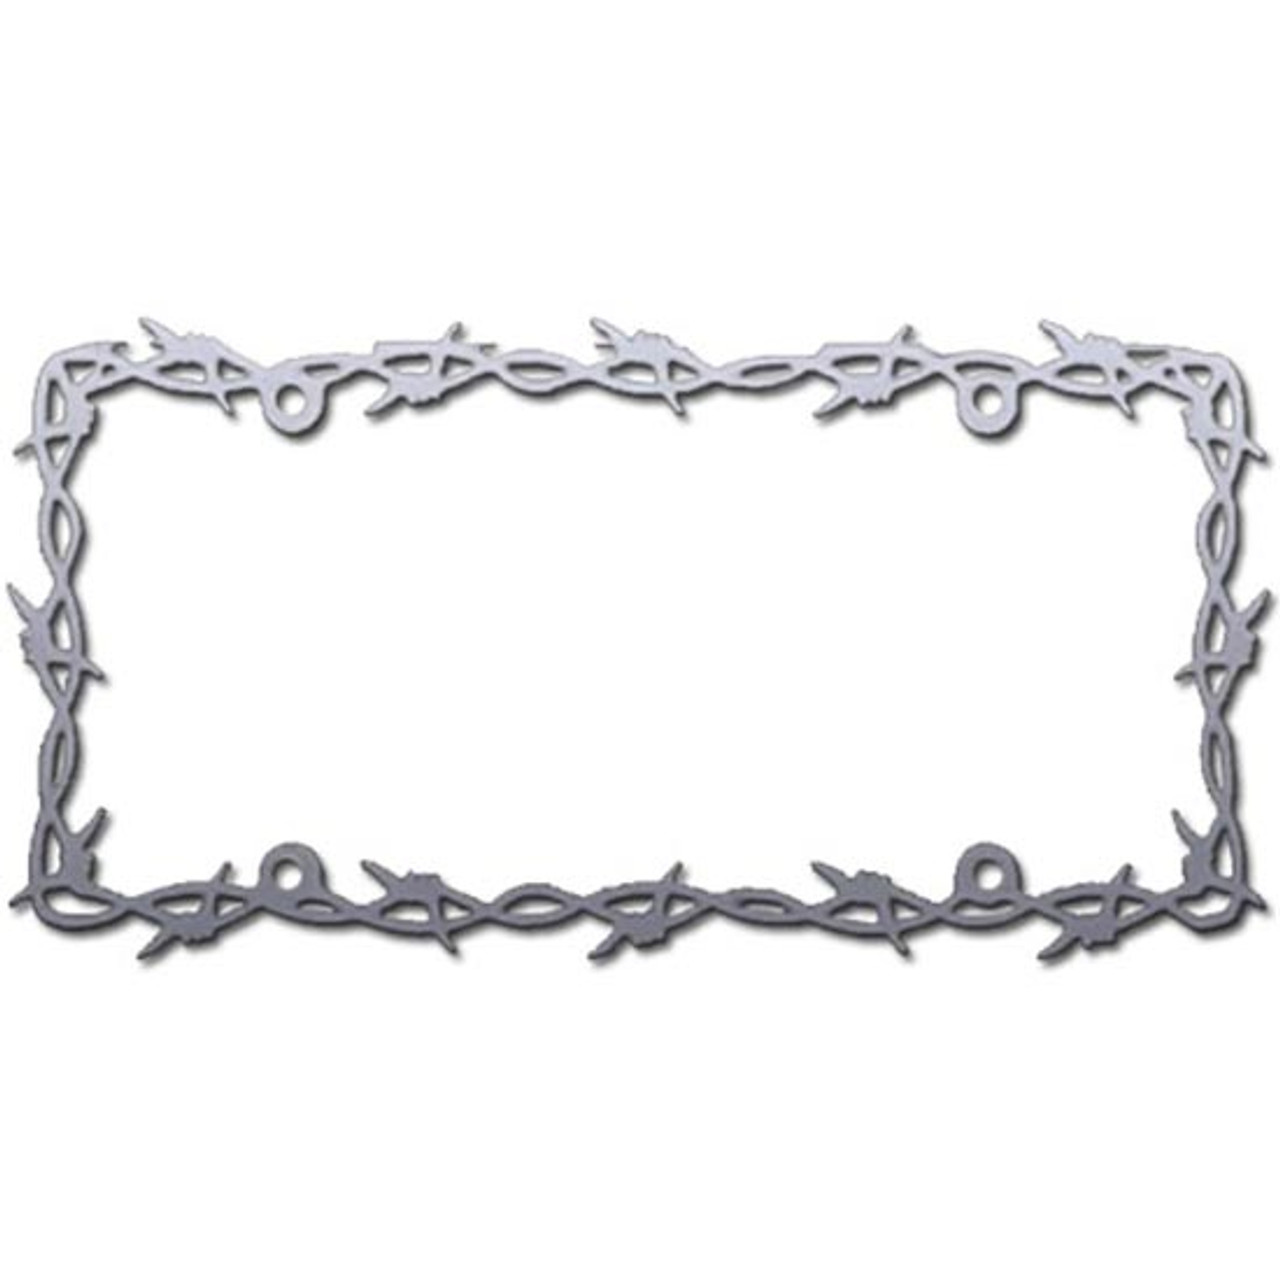 Buy Barbed Wire Products Online in Colombo at Best Prices on